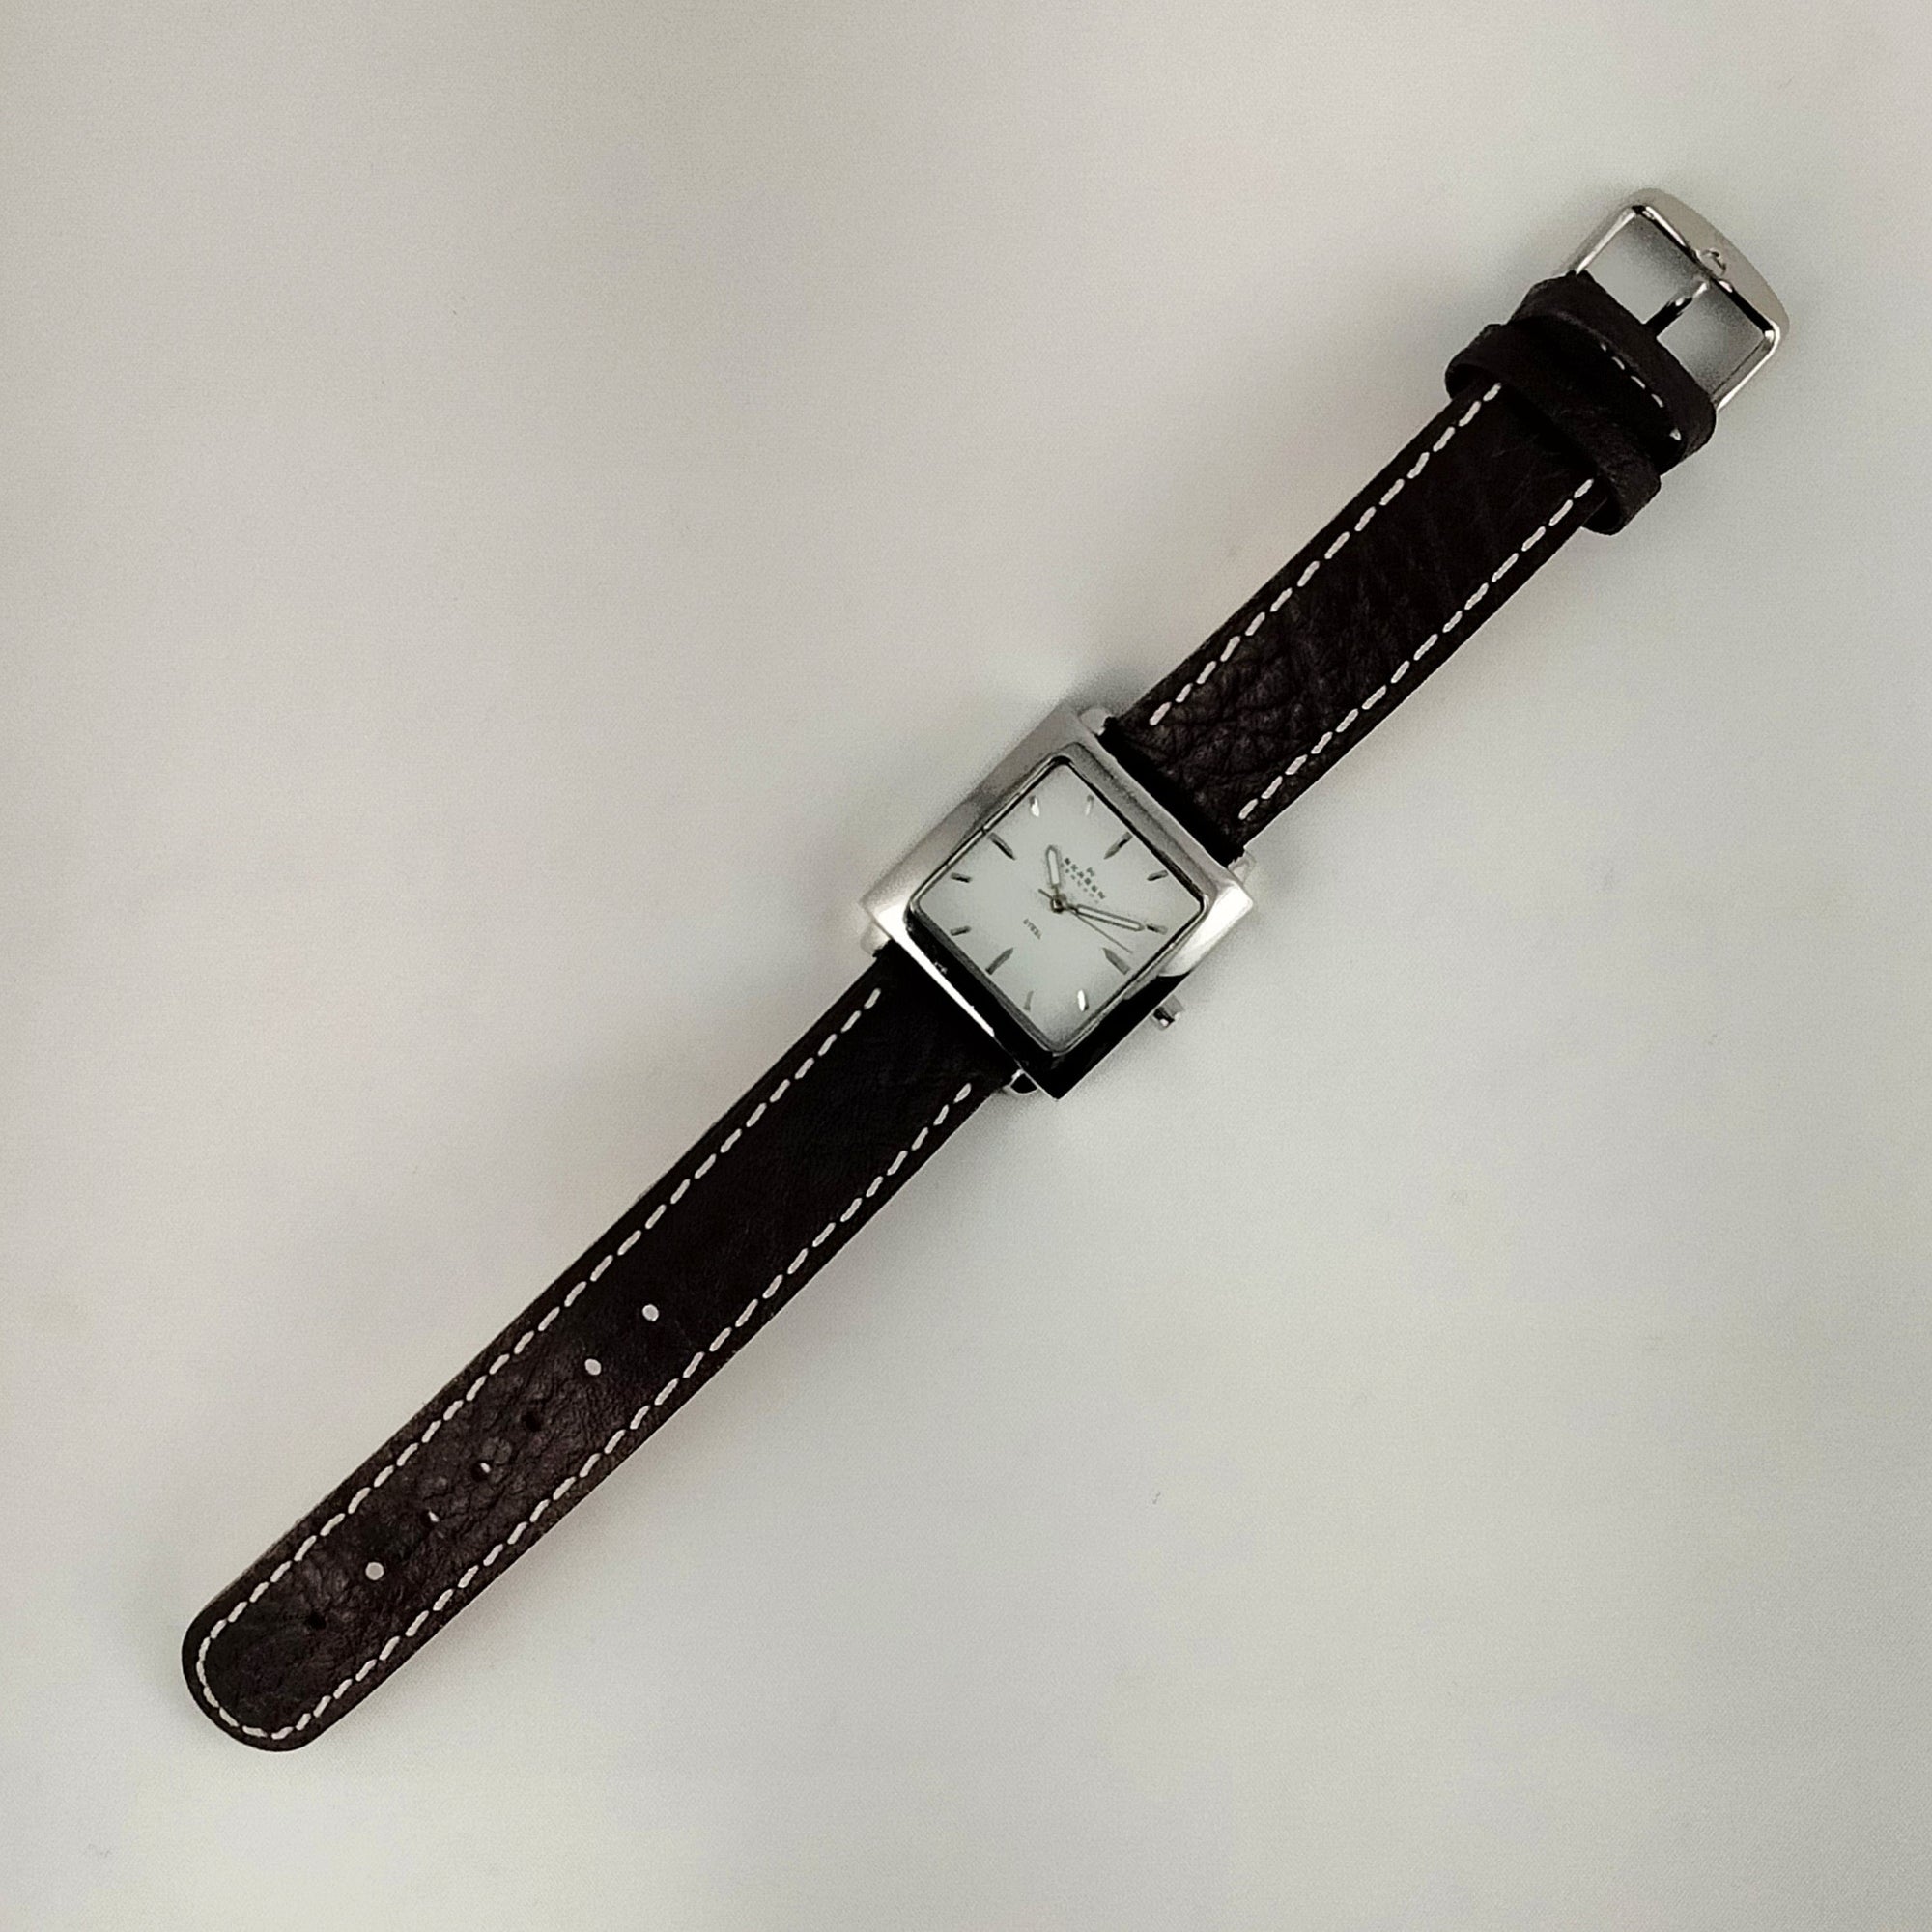 I Like Mikes Mid Century Modern Watches Skagen Unisex Stainless Steel Square Watch, Dark Brown Genuine Leather Strap with White Stitching